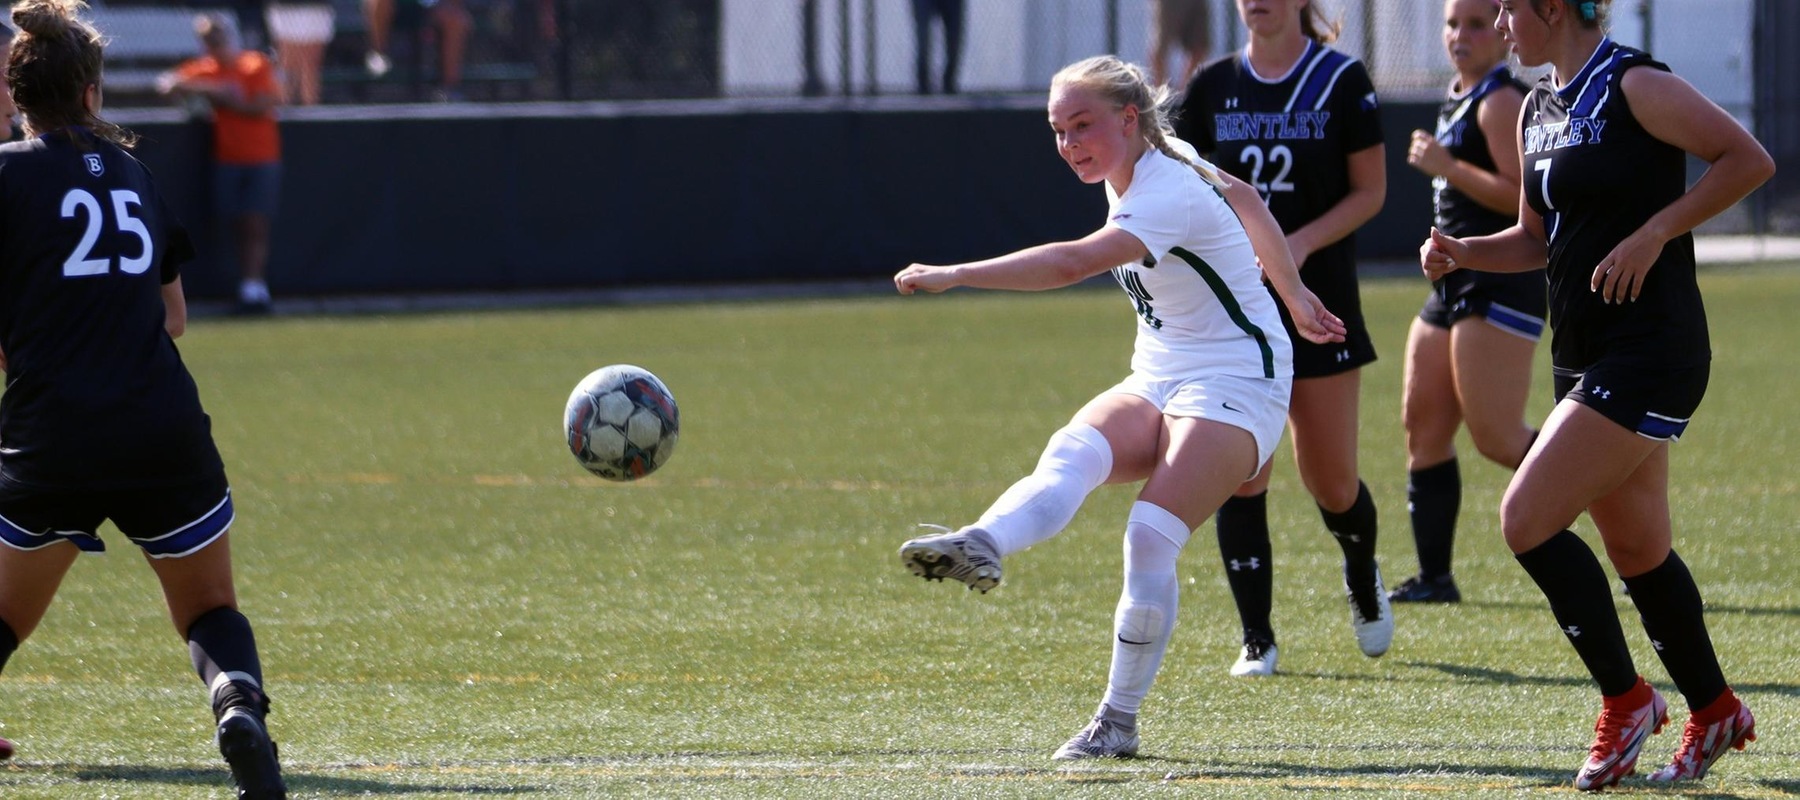 Photo of Emilie Larsen with a shot against Bentley, she would score the lone goal in the 1-1 tie. Copyright 2022; Wilmington University. All rights reserved. Photo by Dan Lauletta. August 26, 2022 v. Bentley.